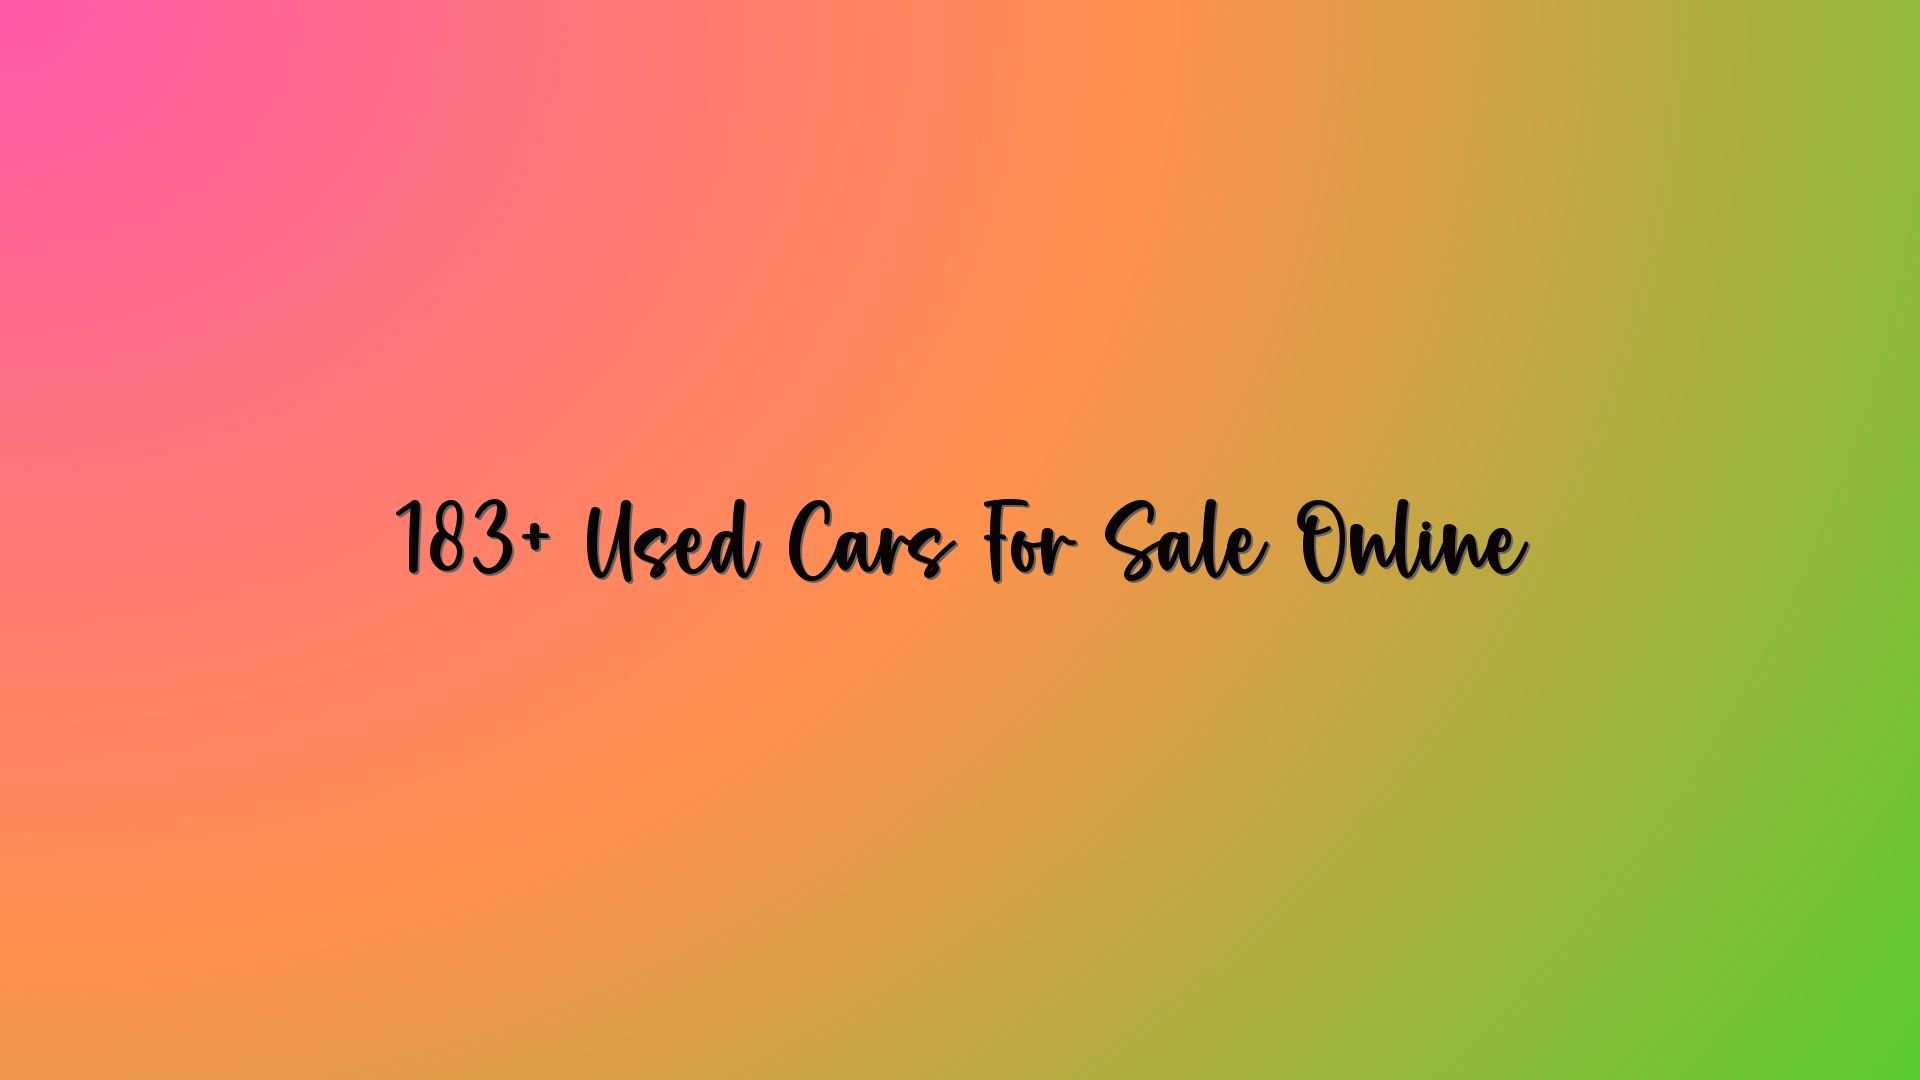 183+ Used Cars For Sale Online